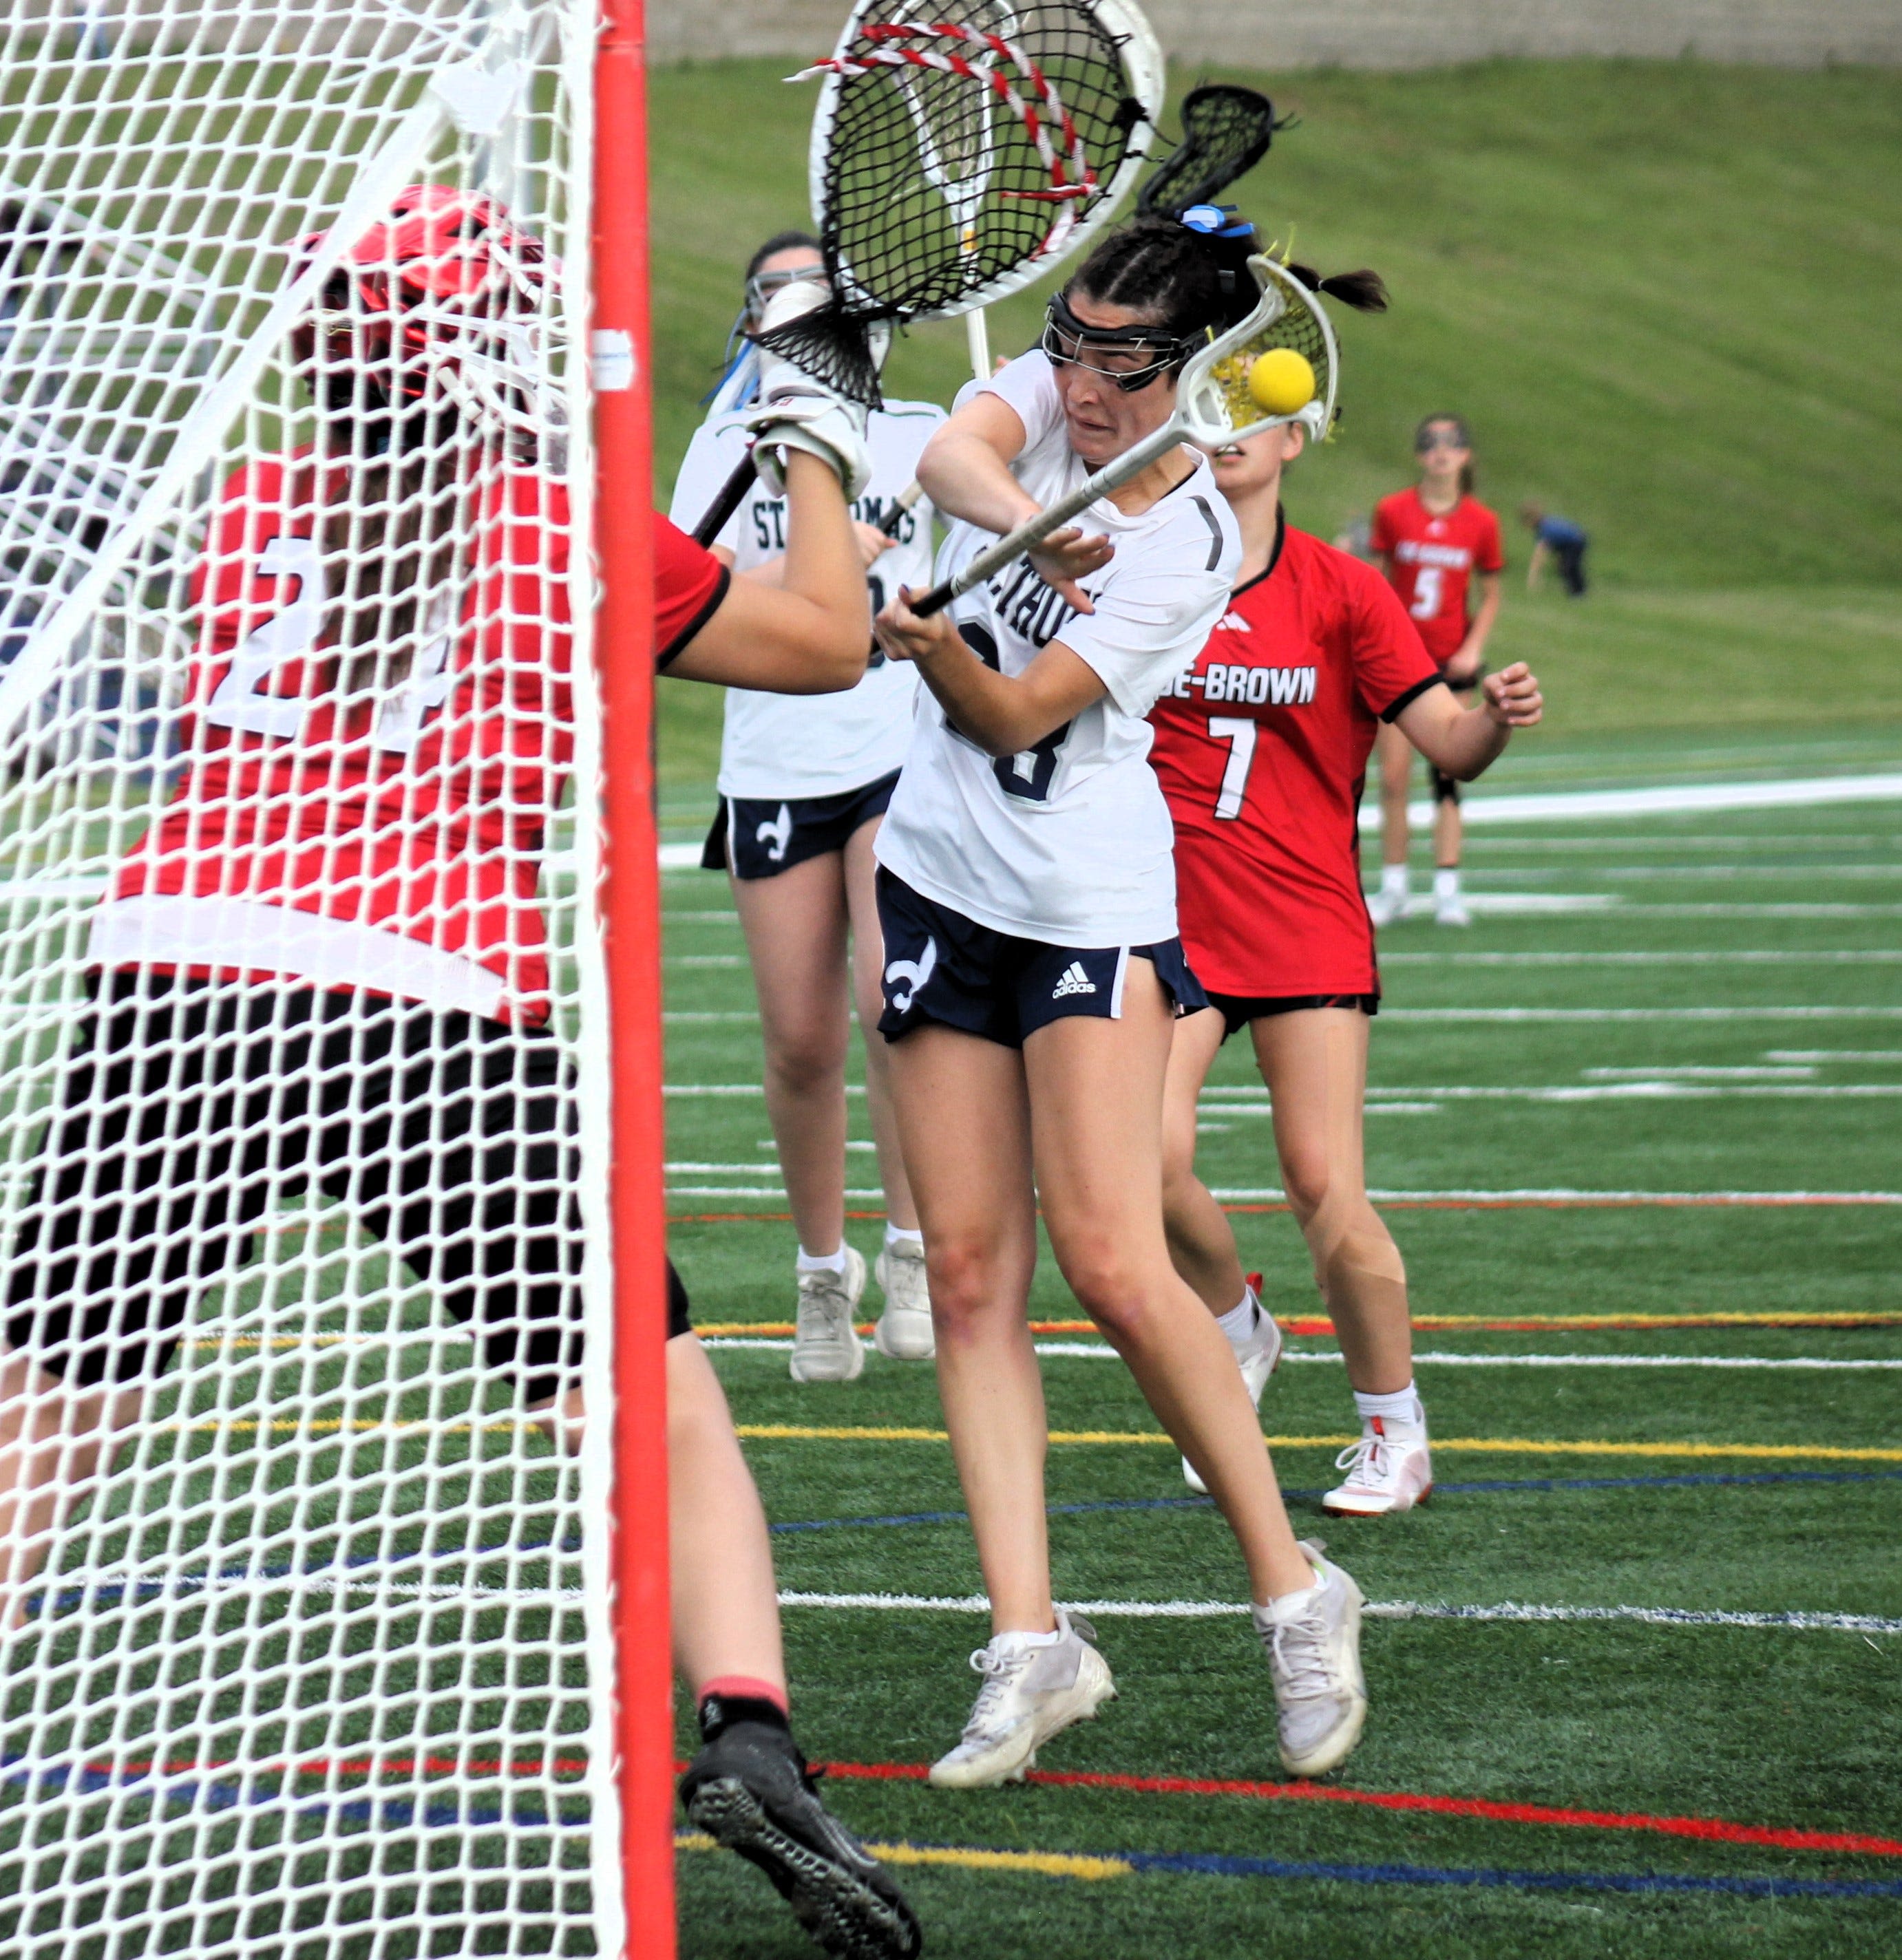 Top-seeded St. Thomas Aquinas advances to Division III girls lacrosse semifinals